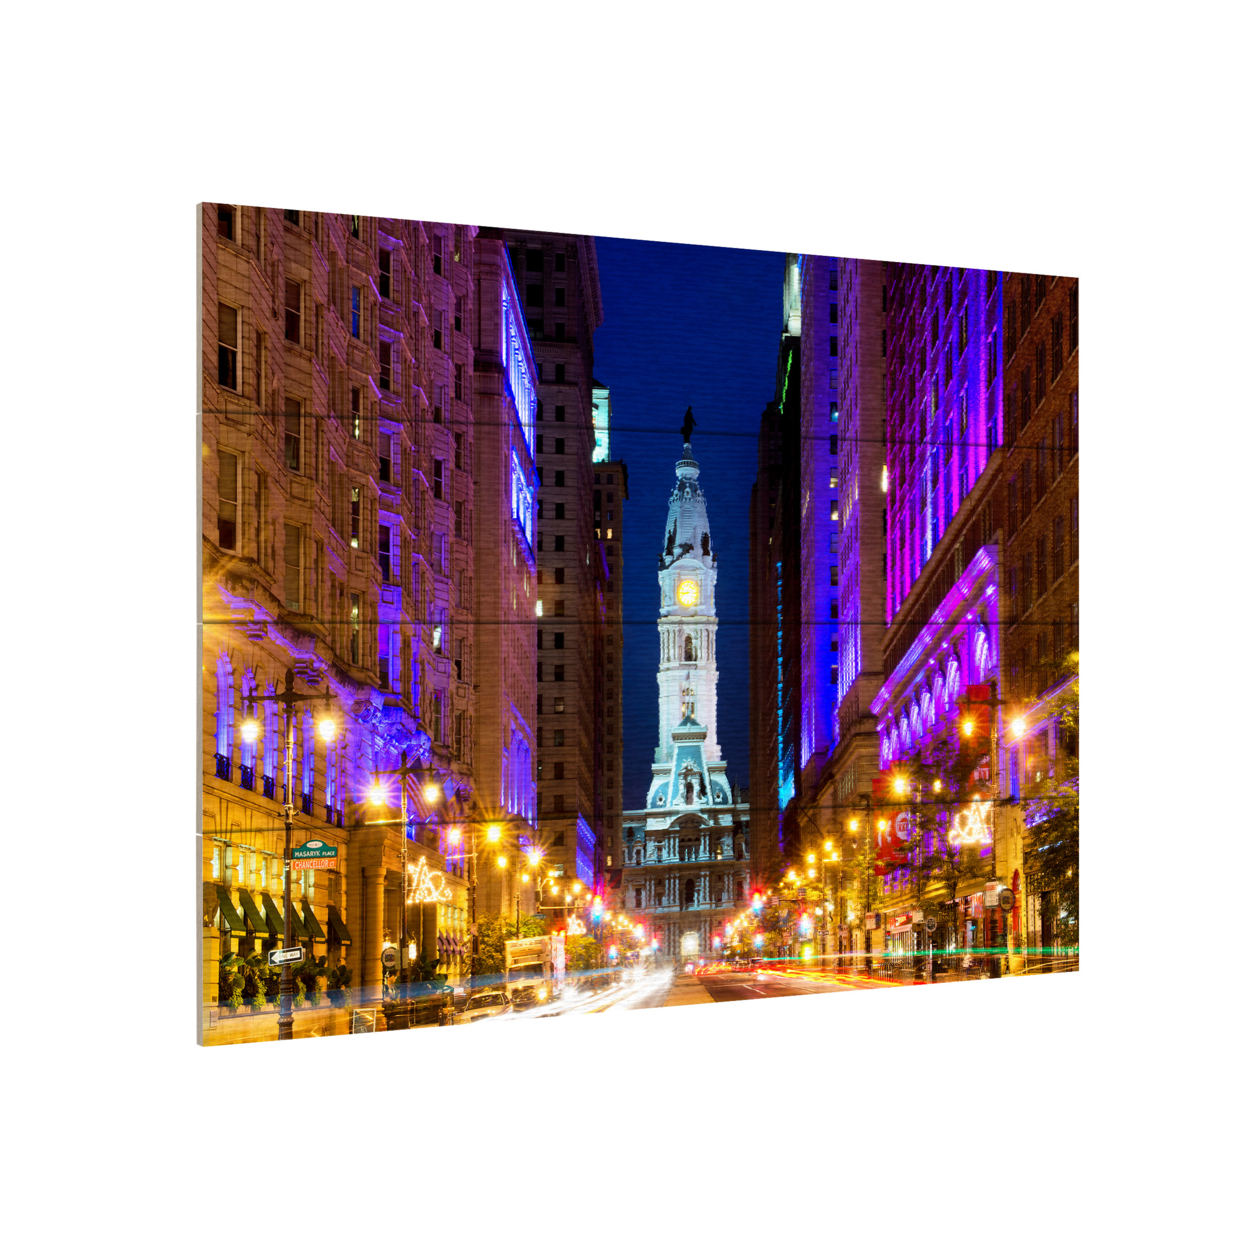 Wall Art 12 X 16 Inches Titled City Hall Philadelphia Ready To Hang Printed On Wooden Planks